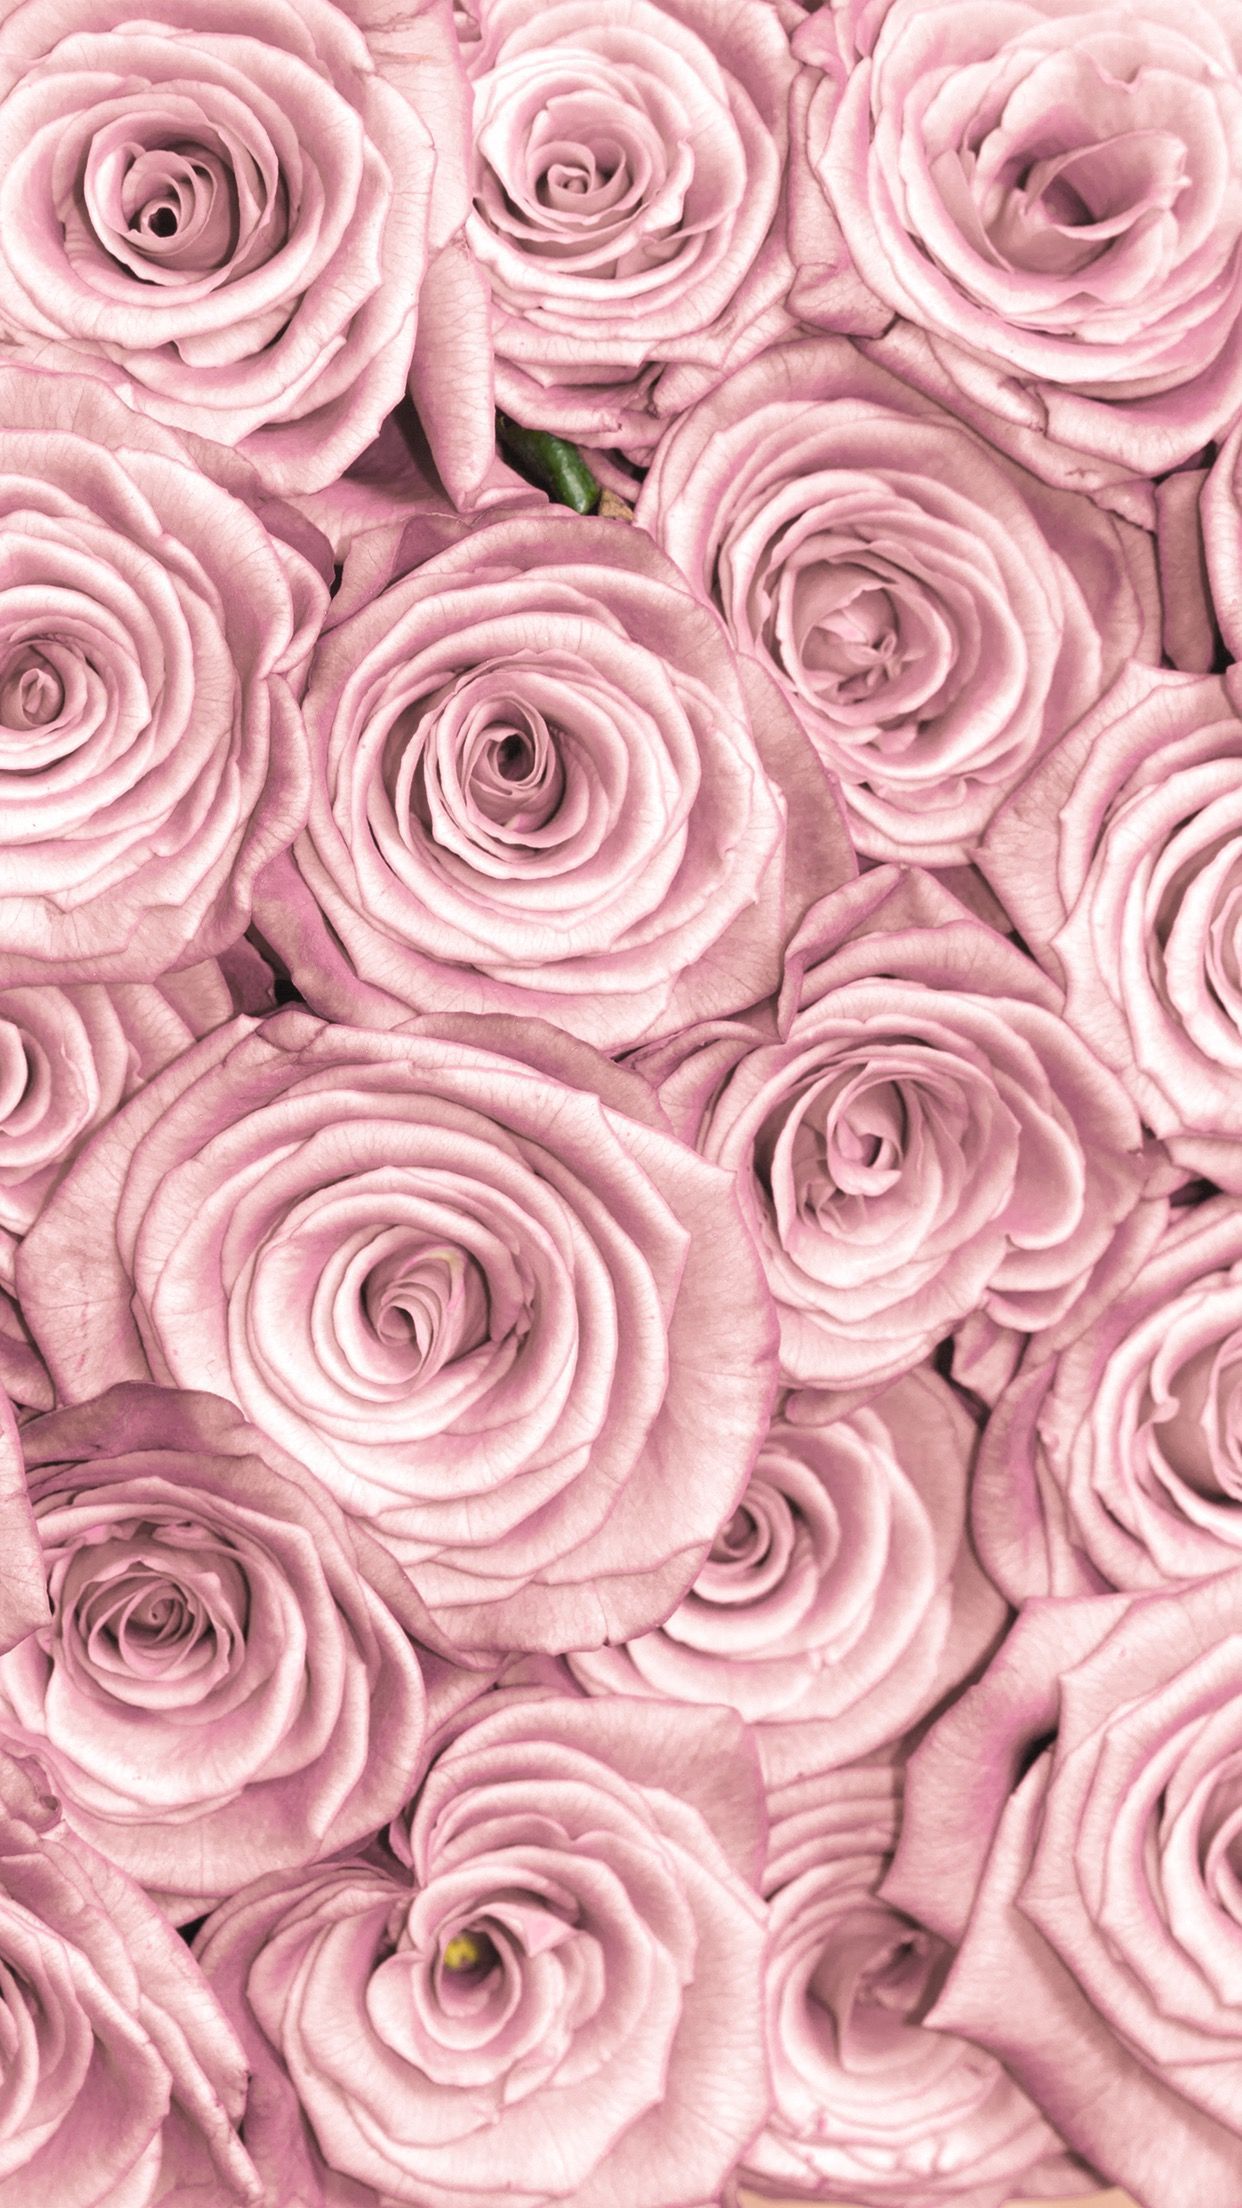 iPhone Background Pink Roses. Rose gold wallpaper, Gold wallpaper